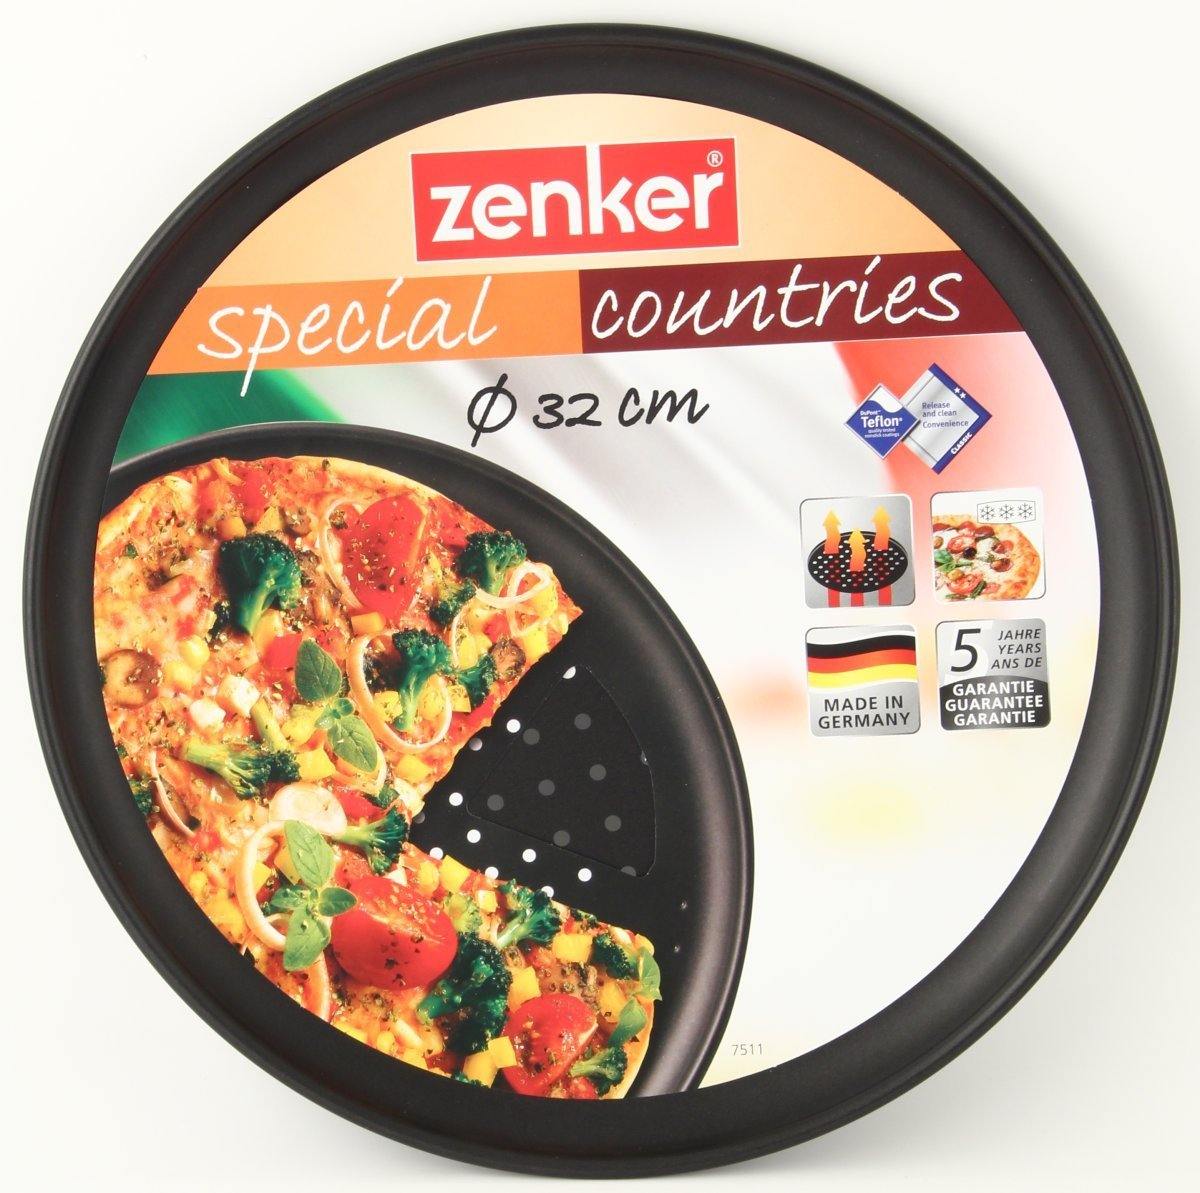 Zenker "Special Countries" Non-Stick Carbon Steel Round Crisper Pan, Black, 32X1.5 cm - Whole and All